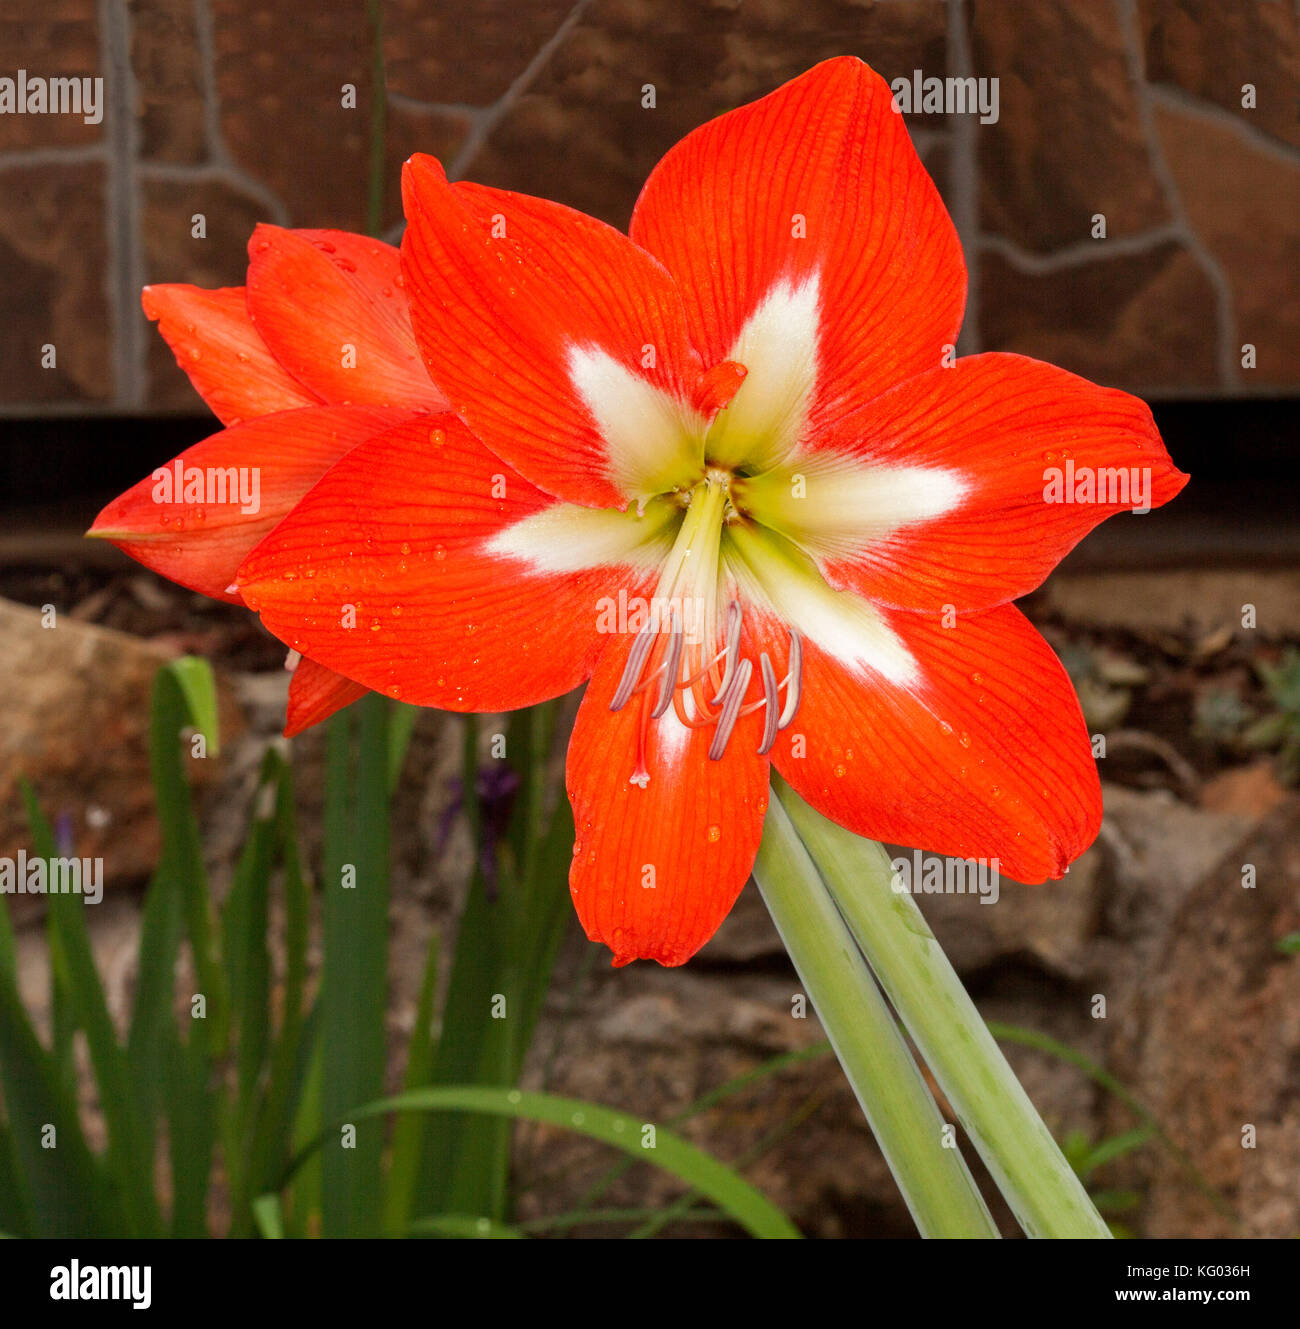 Large vivid orange / red flower with white star-shaped centre of Hippeastrum against dark background Stock Photo